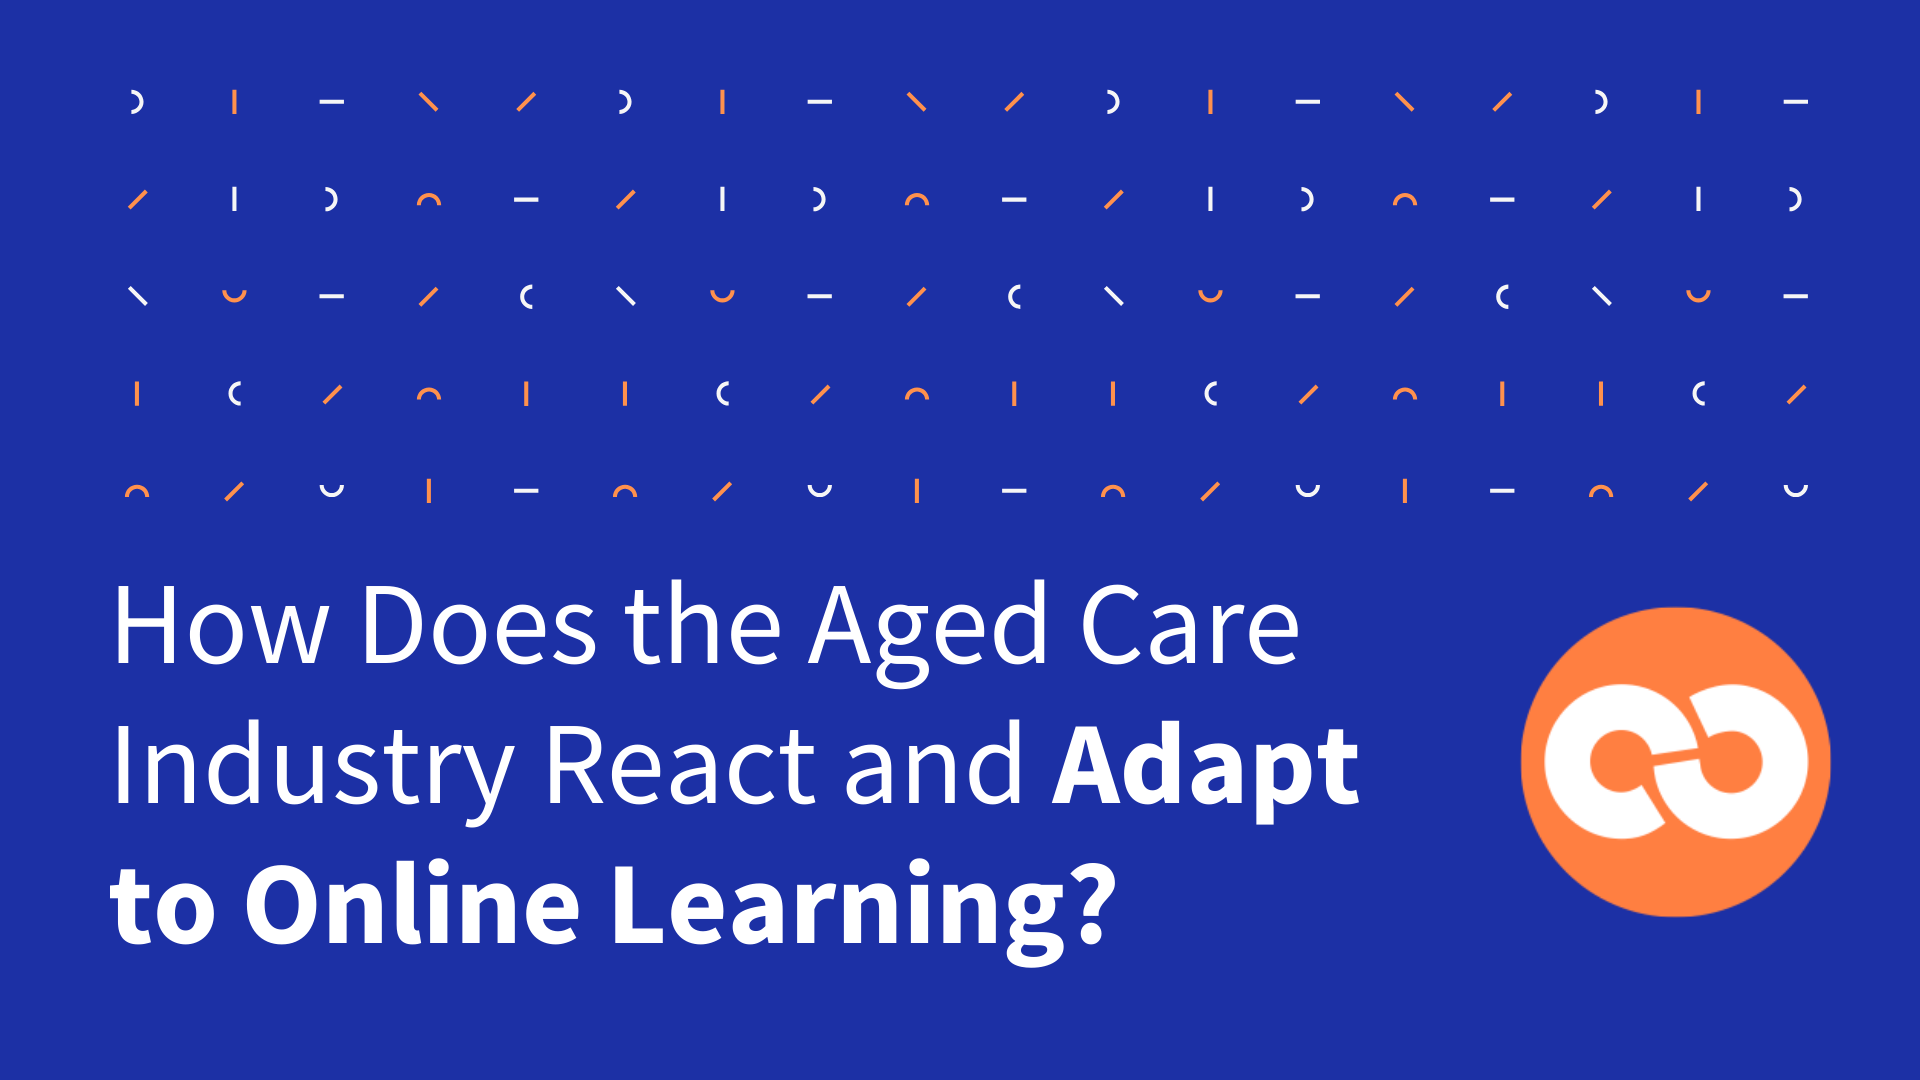 How Does the Aged Care Industry React and Adapt to Online Learning